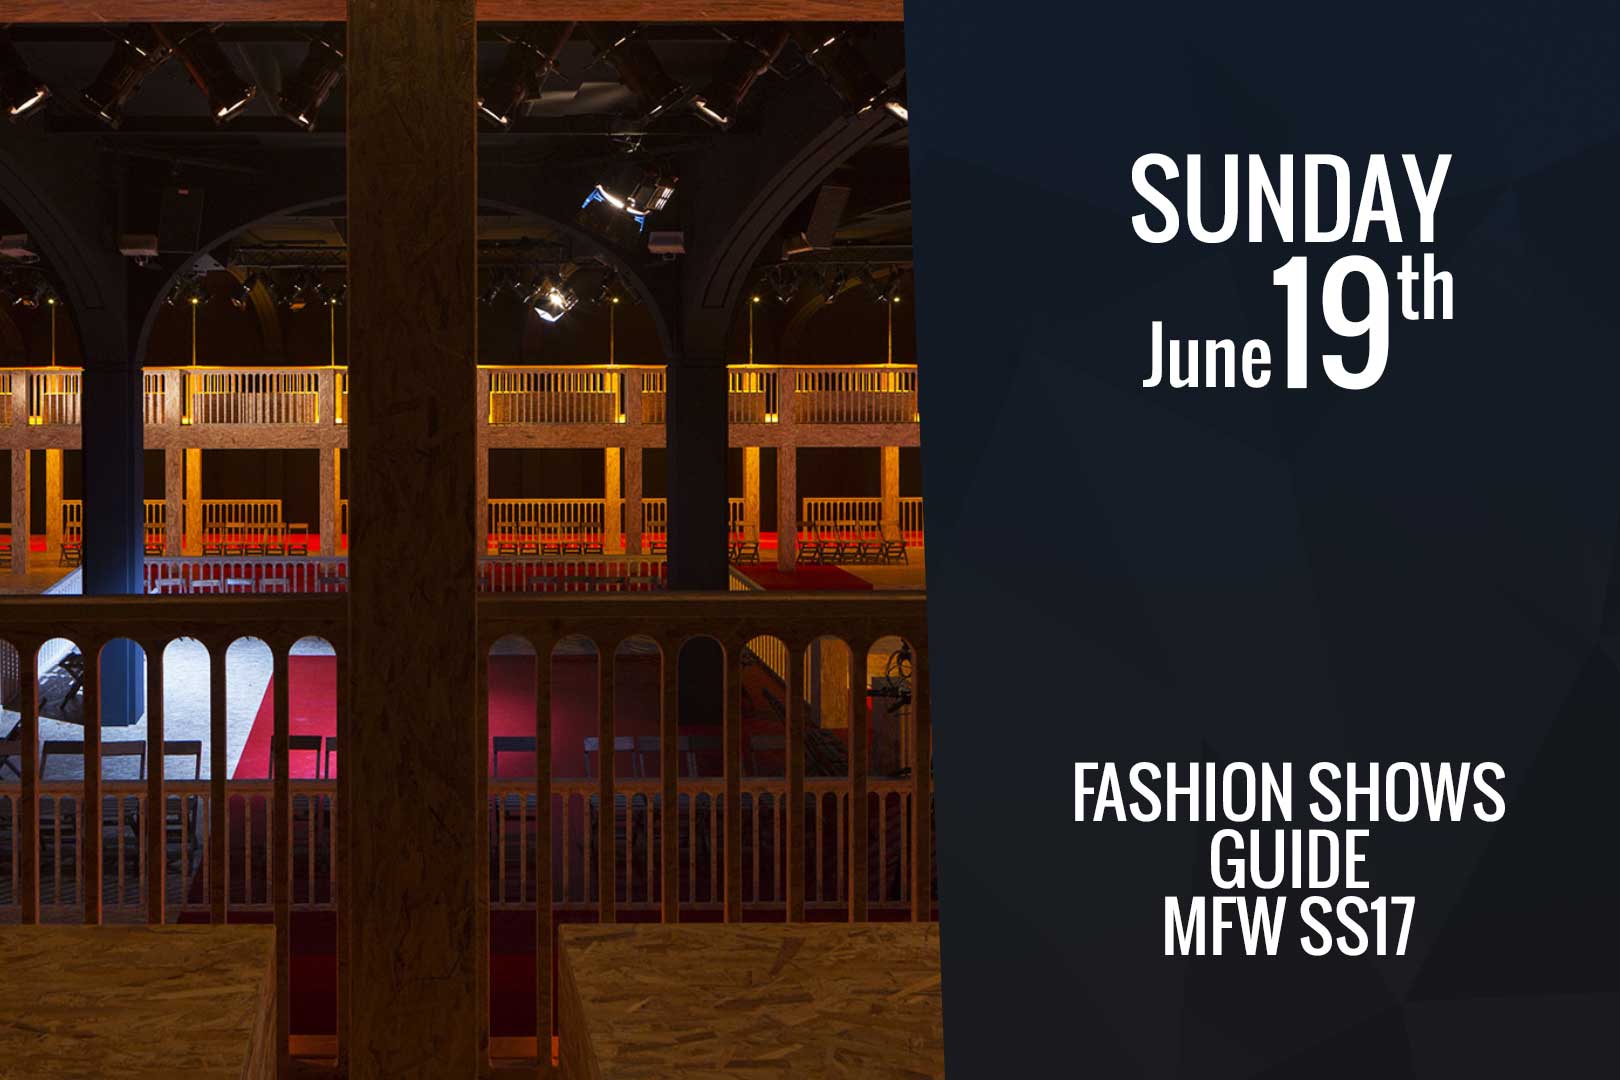 Sunday June 19th: fashion shows guide